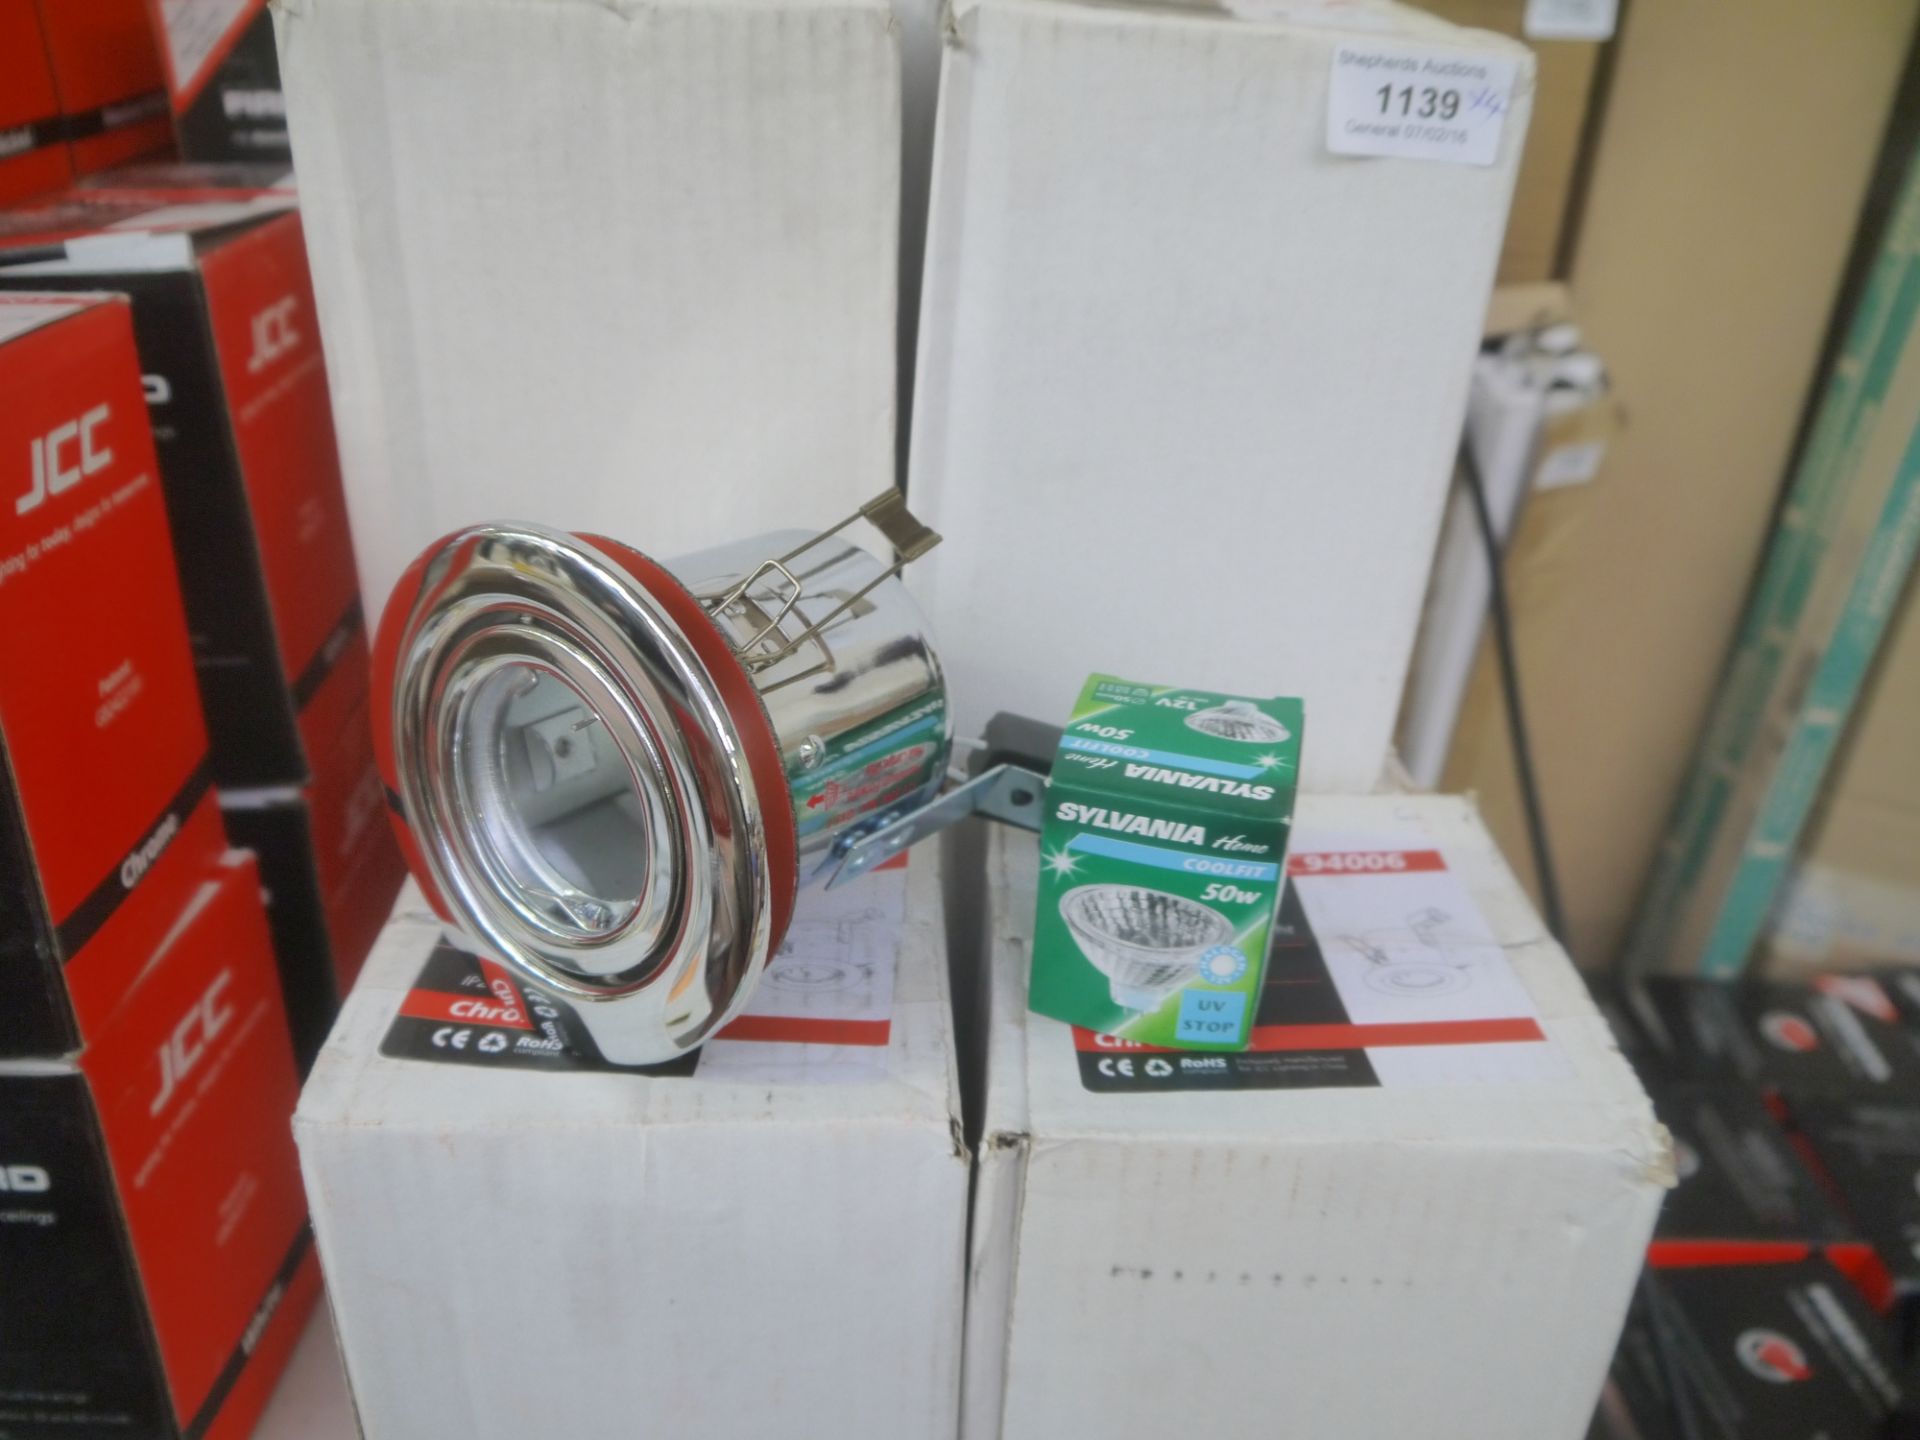 4x JCC JC94006 50W Chrome Fire Rated Tilt Downlight. New and boxed.